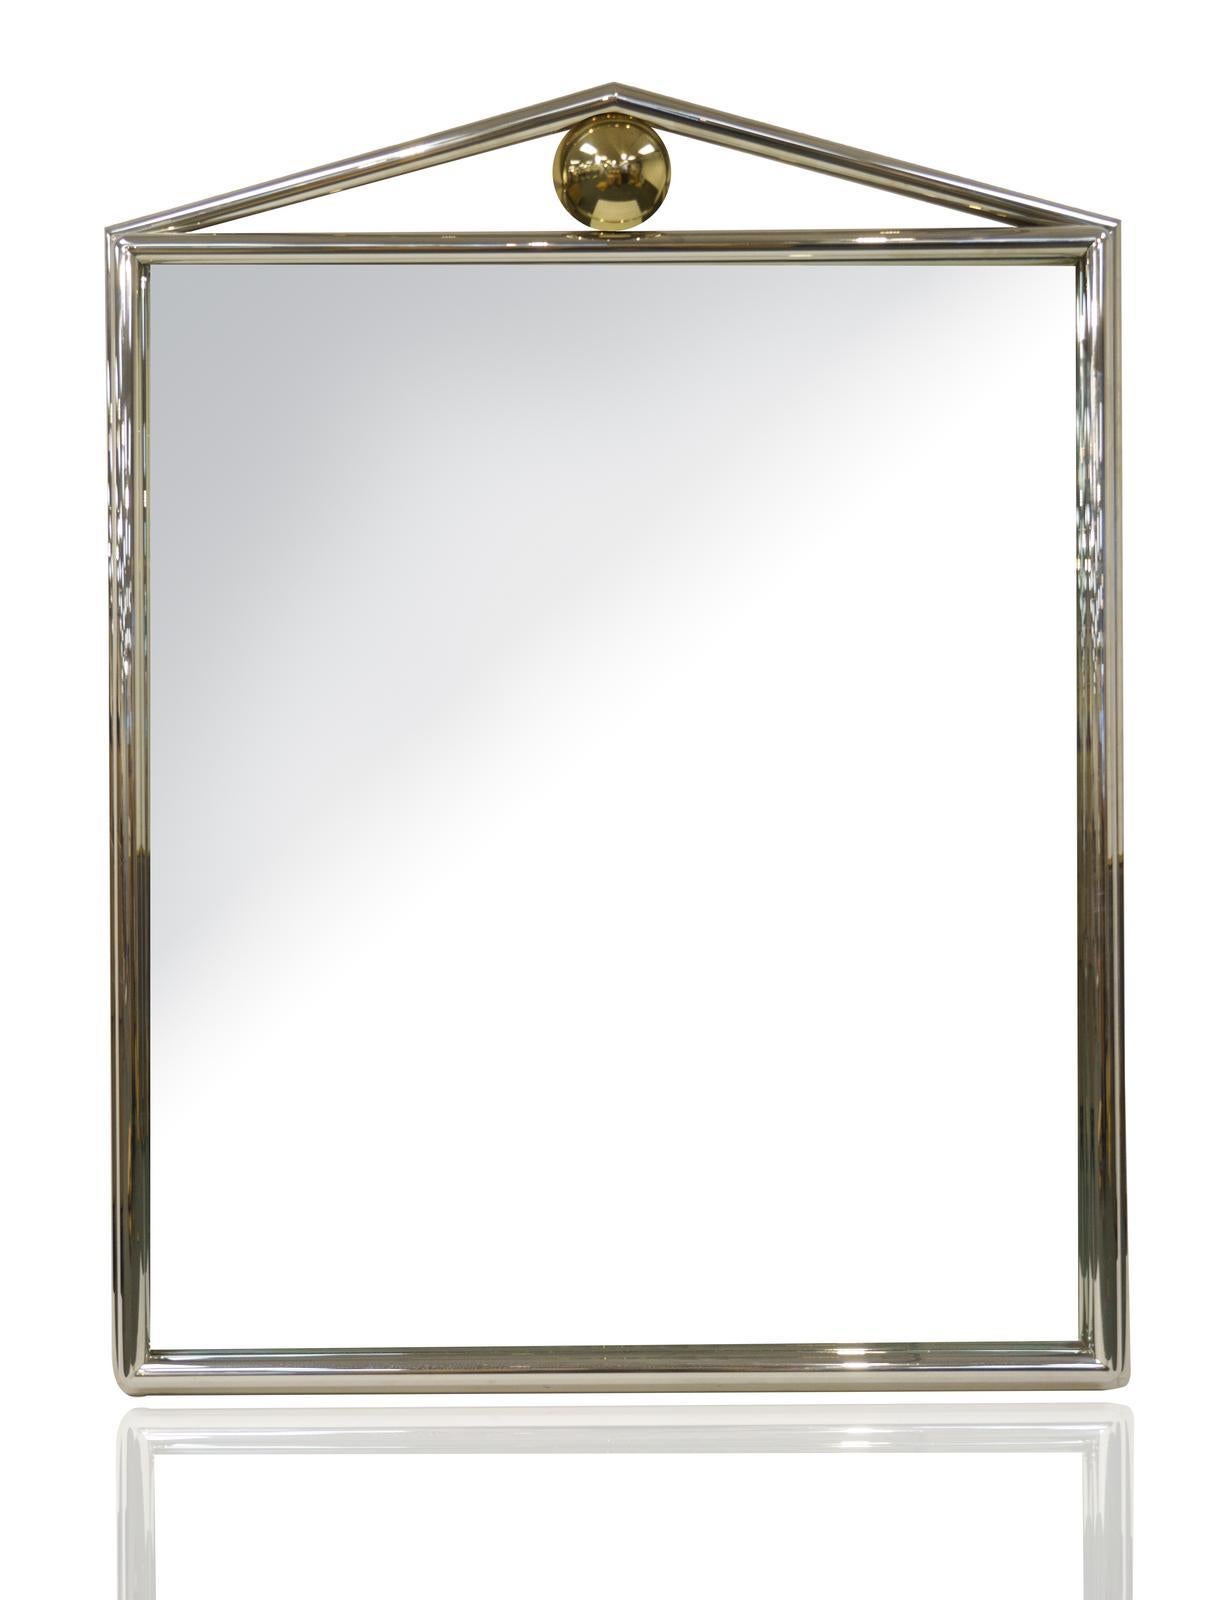 Exceptional Mid Century Modern Chrome Framed / Brass Decorated Mantel Mirror In Good Condition For Sale In Tarry Town, NY